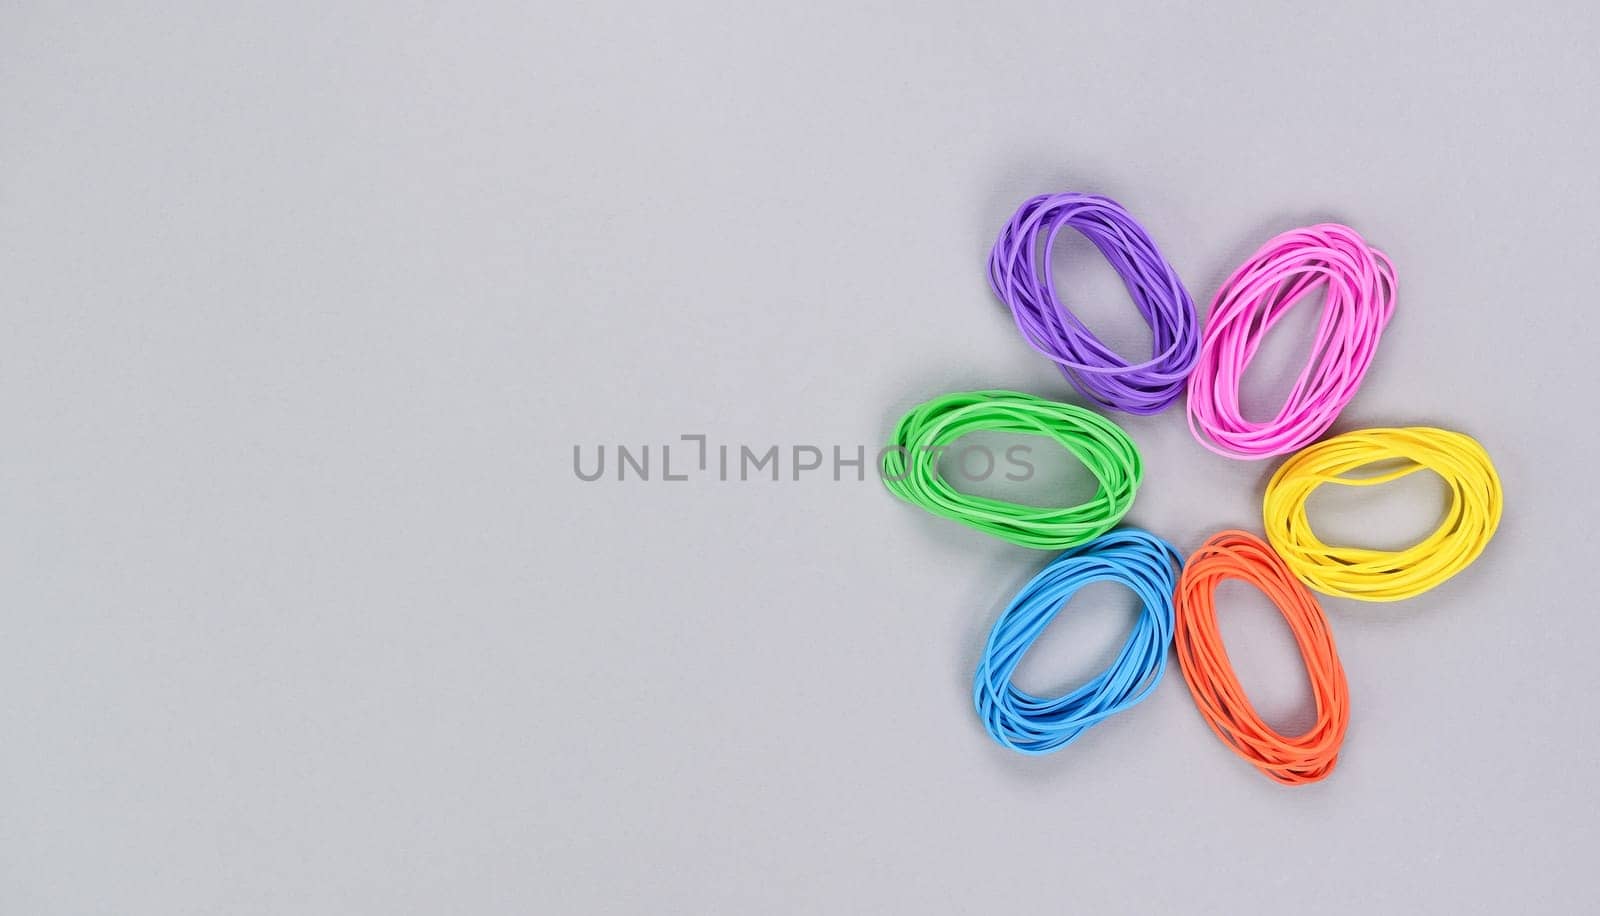 Multicolored flower made of elastic. Top view of colorful rubber bands isolated on white. Rainbow elastic rubber bands on white. Rainbow flower shape